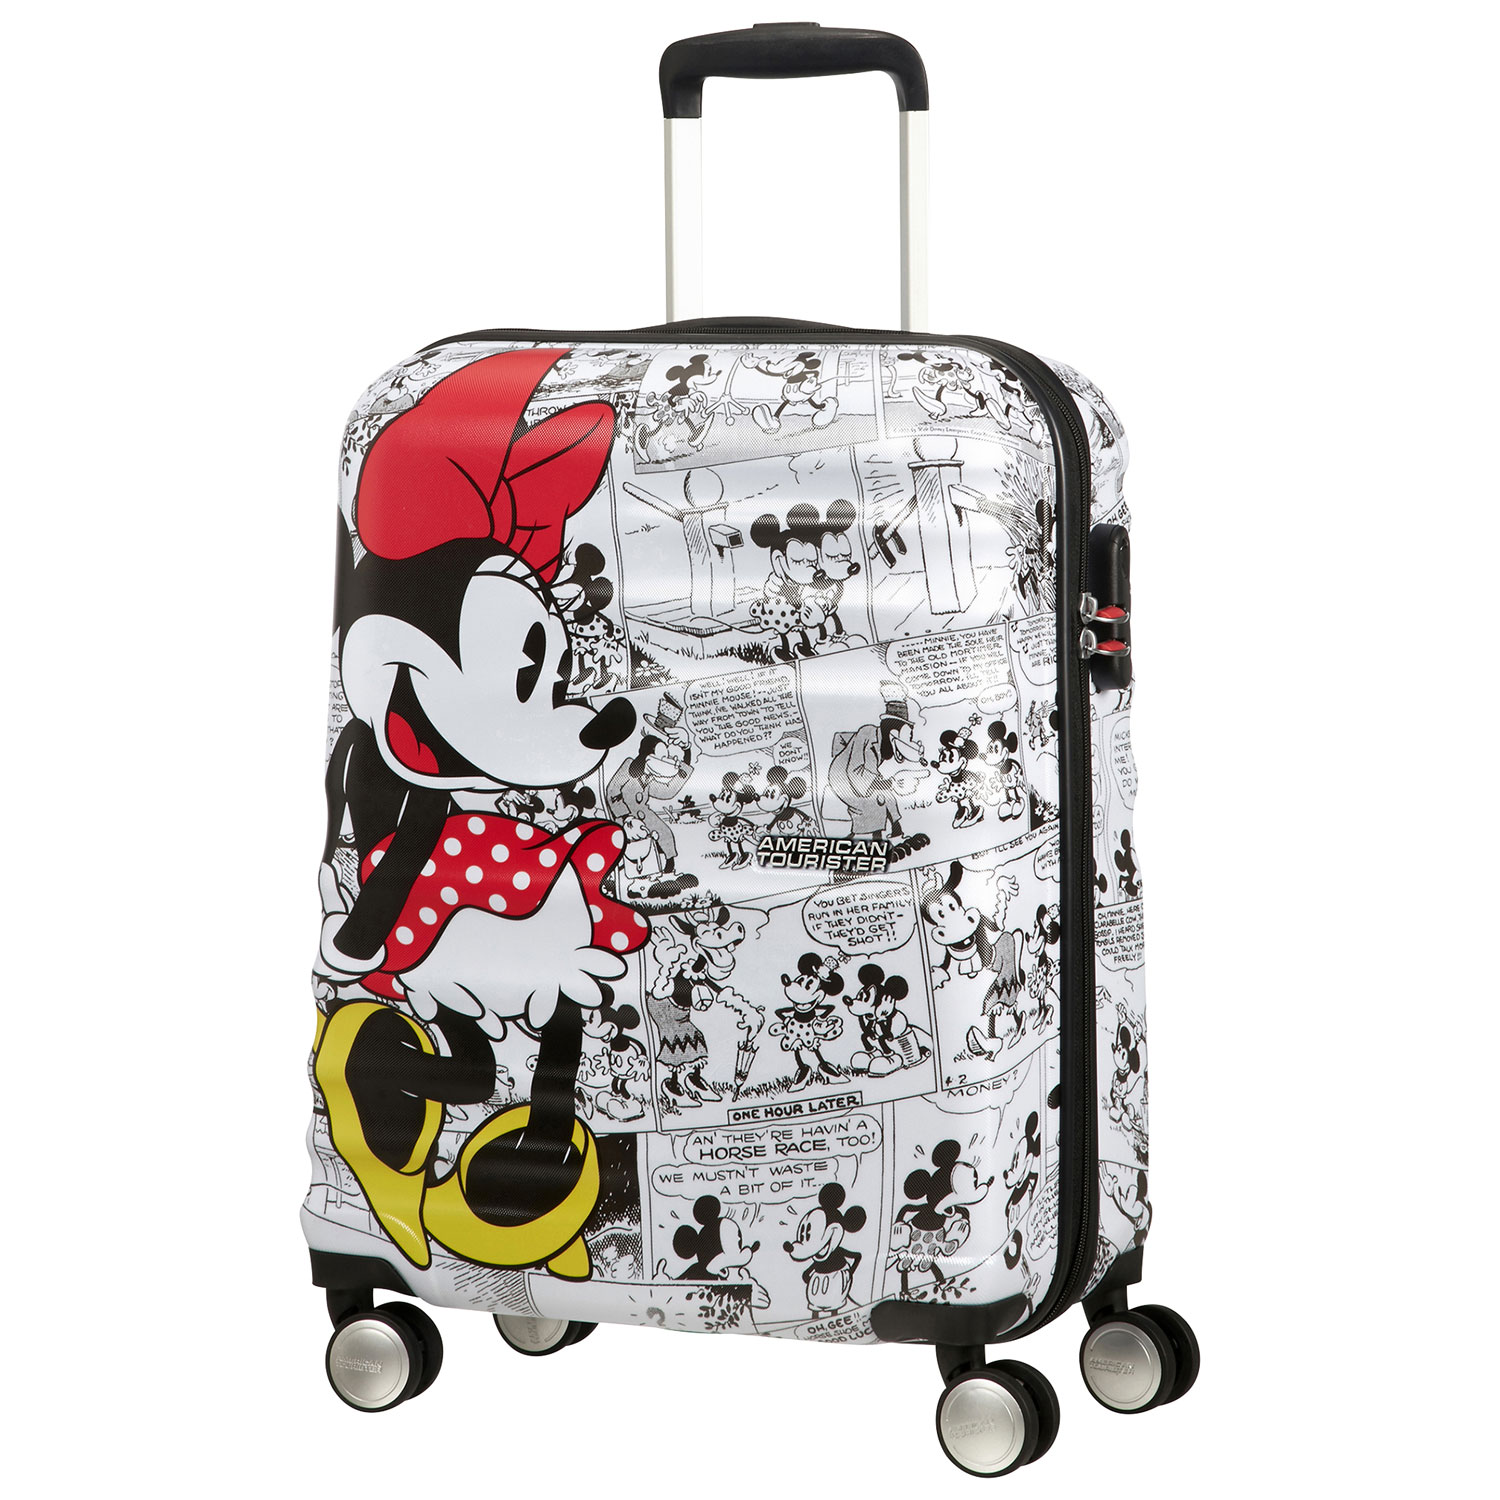 American Tourister Disney Wavebreaker 21" Hard Side Carry-On Luggage - White/Minnie Mouse